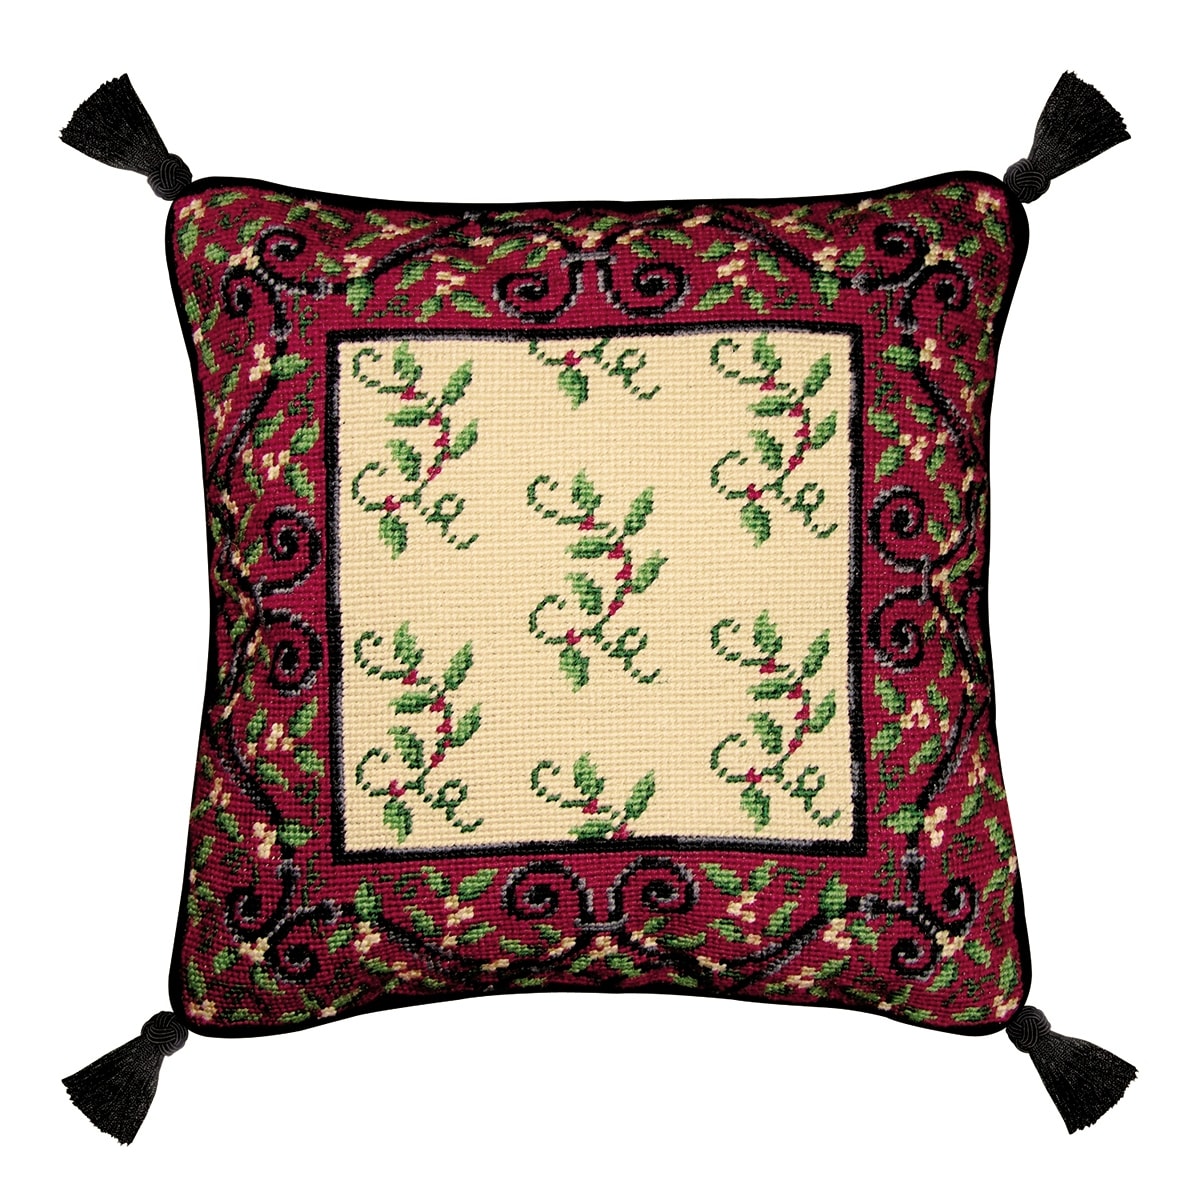 19th Century Floral Embroidered Needlepoint Pillows - A Pair